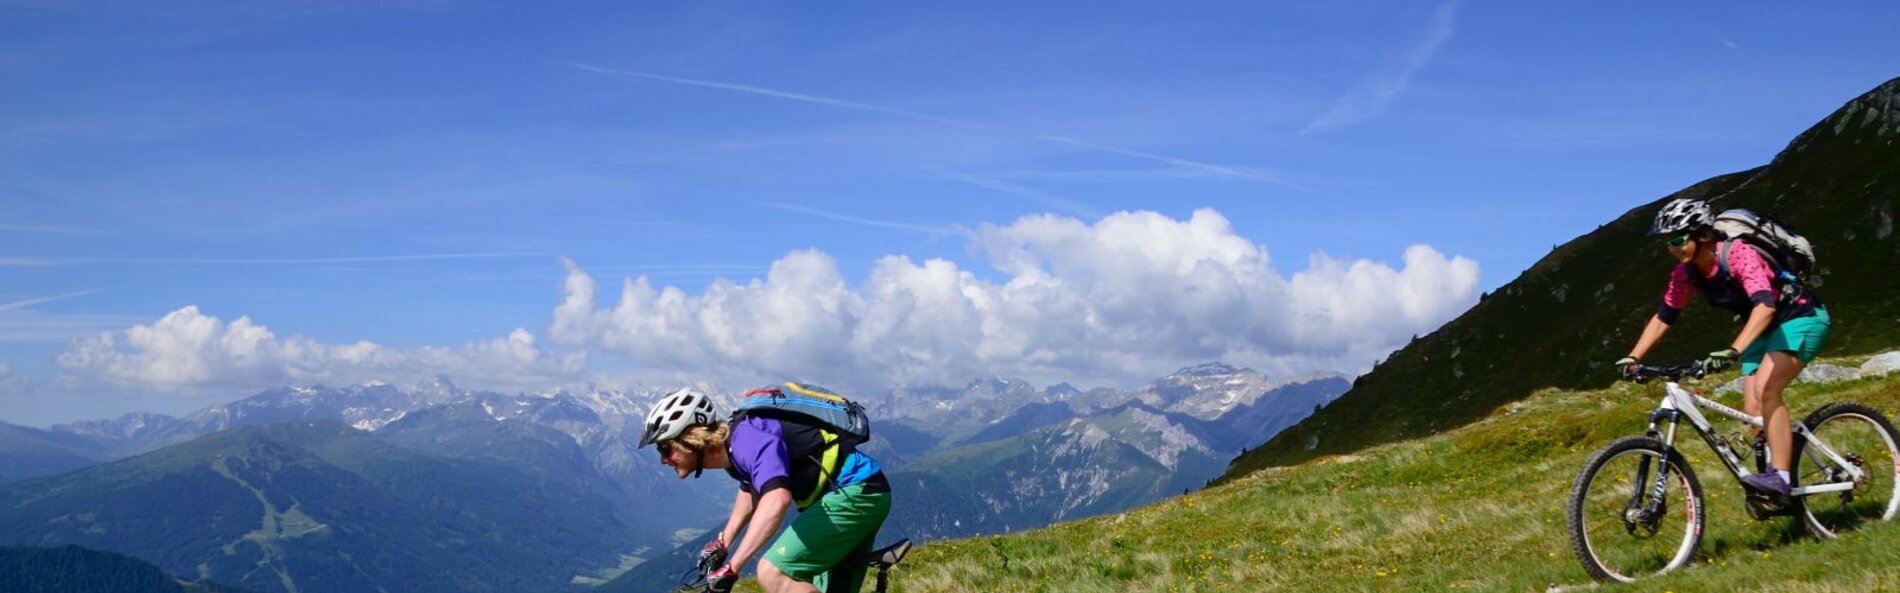 Two mountain bikers, alp, mountains of the Alps